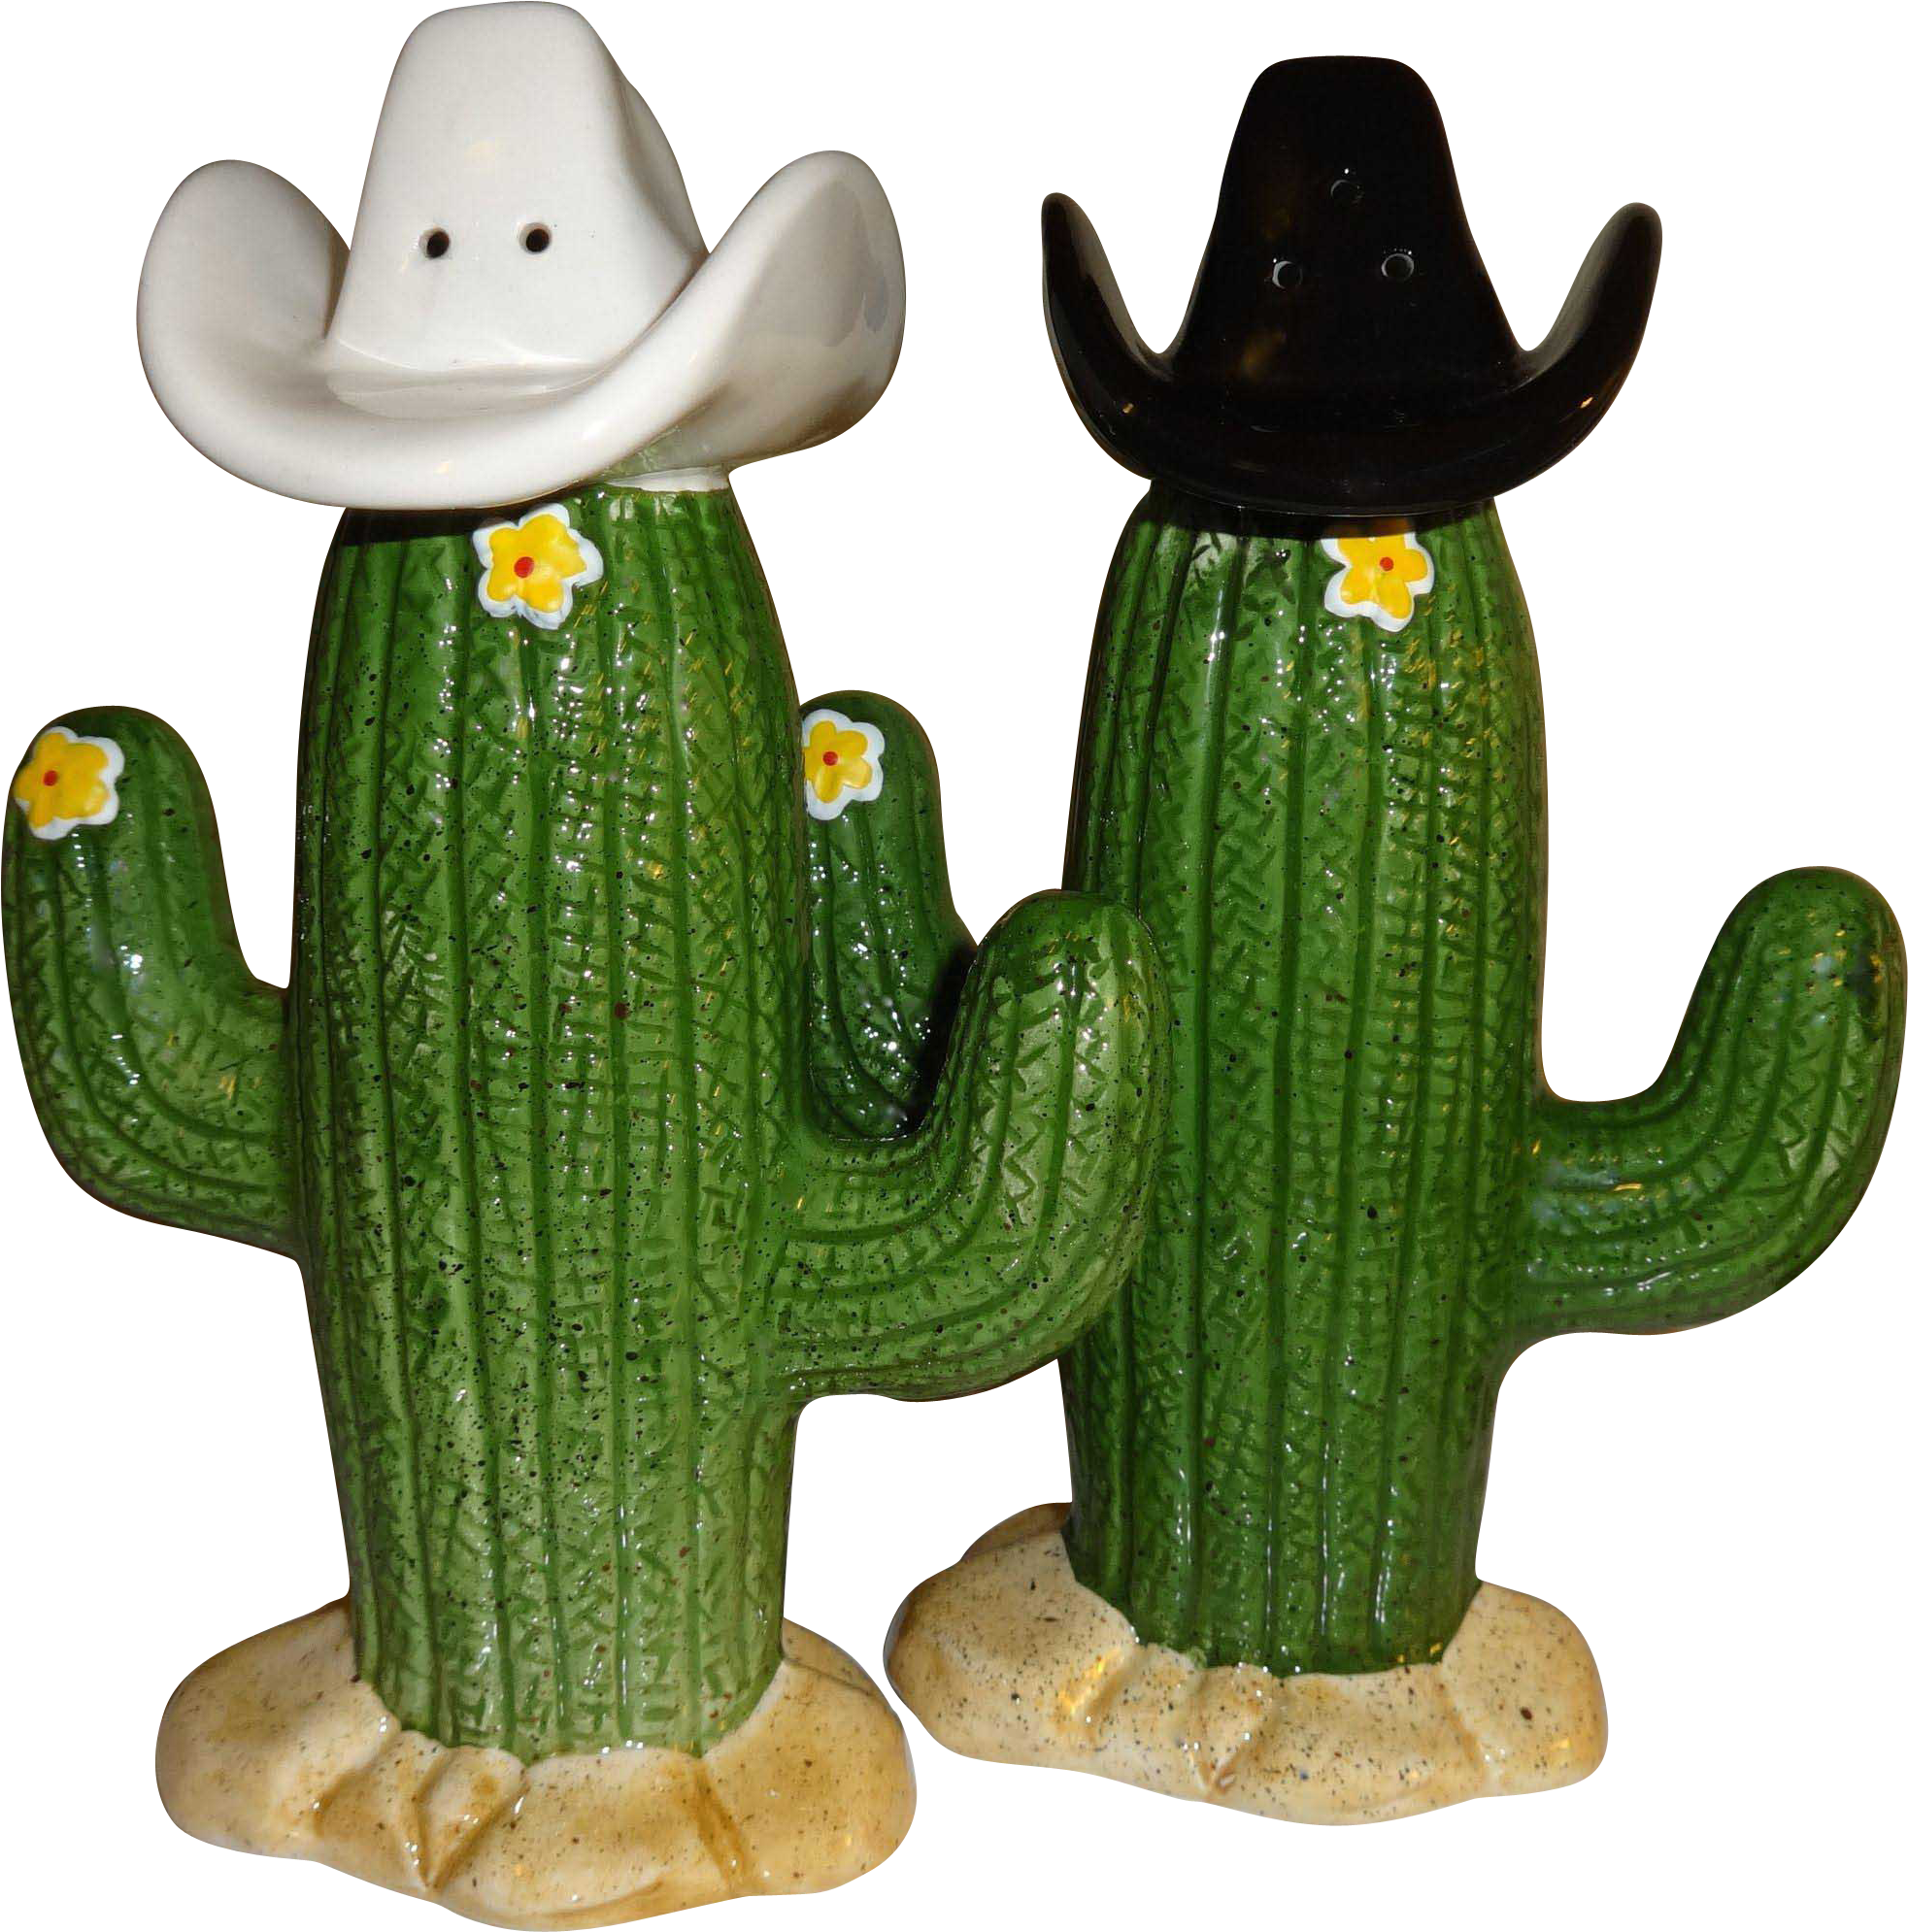 Cowboy Salt And Pepper Shakers (1989x1989)